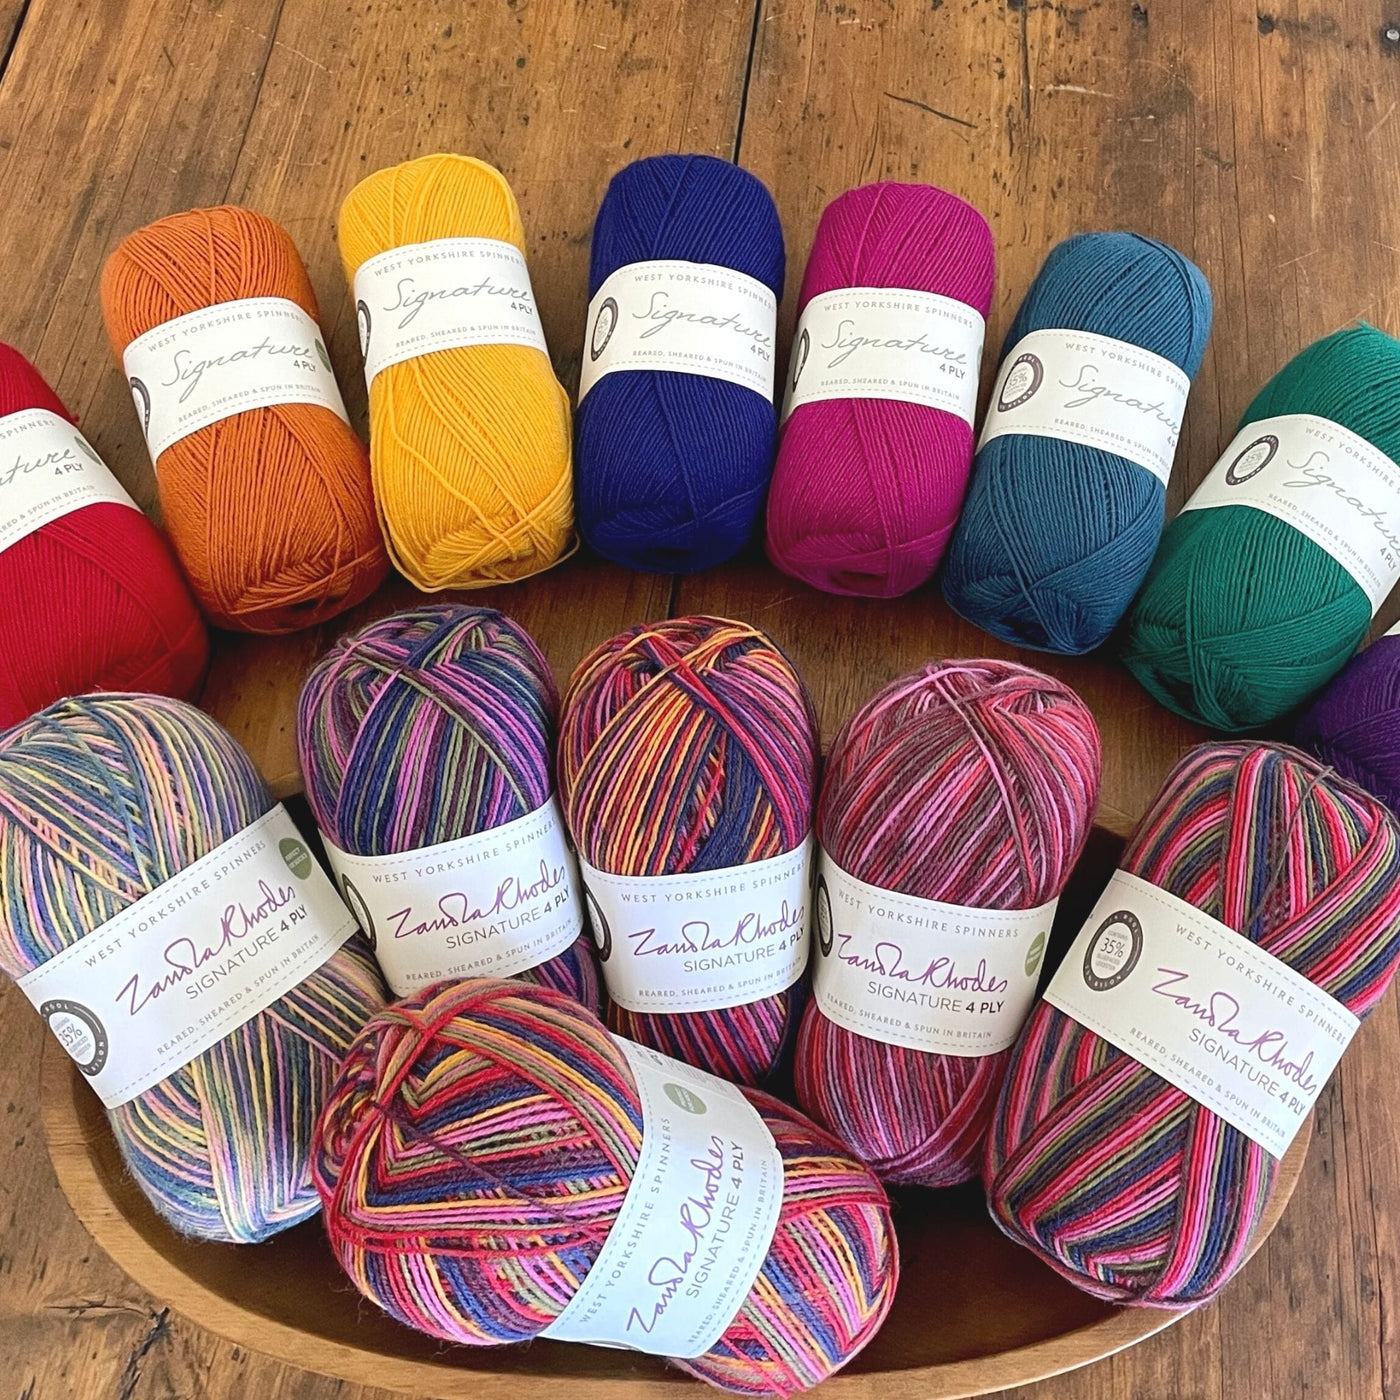 West Yorkshire Spinners Signature 4ply yarn, fingering weight, in 100 gram balls, arranged with seven solid colors on a table and six coordinating striped colors in a wooden bowl.